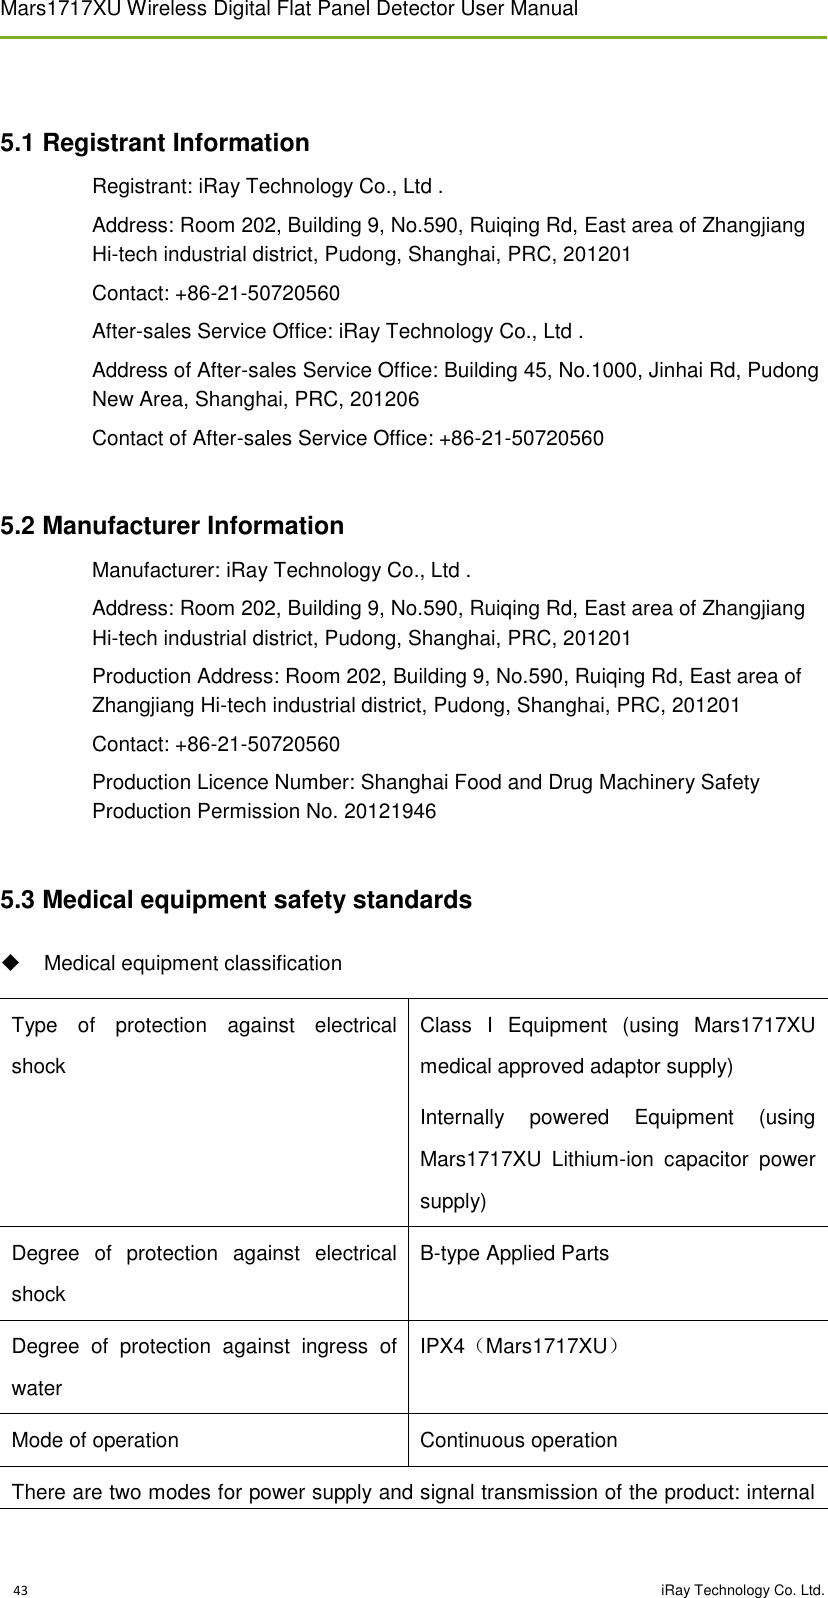 Mars1717XU Wireless Digital Flat Panel Detector User Manual      43                                                                                                                                                                                                iRay Technology Co. Ltd.                                                                                                                                                                                  5.1 Registrant Information Registrant: iRay Technology Co., Ltd . Address: Room 202, Building 9, No.590, Ruiqing Rd, East area of Zhangjiang Hi-tech industrial district, Pudong, Shanghai, PRC, 201201 Contact: +86-21-50720560 After-sales Service Office: iRay Technology Co., Ltd .  Address of After-sales Service Office: Building 45, No.1000, Jinhai Rd, Pudong New Area, Shanghai, PRC, 201206 Contact of After-sales Service Office: +86-21-50720560  5.2 Manufacturer Information Manufacturer: iRay Technology Co., Ltd .  Address: Room 202, Building 9, No.590, Ruiqing Rd, East area of Zhangjiang Hi-tech industrial district, Pudong, Shanghai, PRC, 201201 Production Address: Room 202, Building 9, No.590, Ruiqing Rd, East area of Zhangjiang Hi-tech industrial district, Pudong, Shanghai, PRC, 201201 Contact: +86-21-50720560 Production Licence Number: Shanghai Food and Drug Machinery Safety Production Permission No. 20121946  5.3 Medical equipment safety standards   Medical equipment classification Type  of  protection  against  electrical shock Class  I  Equipment  (using  Mars1717XU medical approved adaptor supply) Internally  powered  Equipment  (using Mars1717XU  Lithium-ion  capacitor  power supply) Degree  of  protection  against  electrical shock B-type Applied Parts Degree  of  protection  against  ingress  of water IPX4（Mars1717XU） Mode of operation Continuous operation There are two modes for power supply and signal transmission of the product: internal 